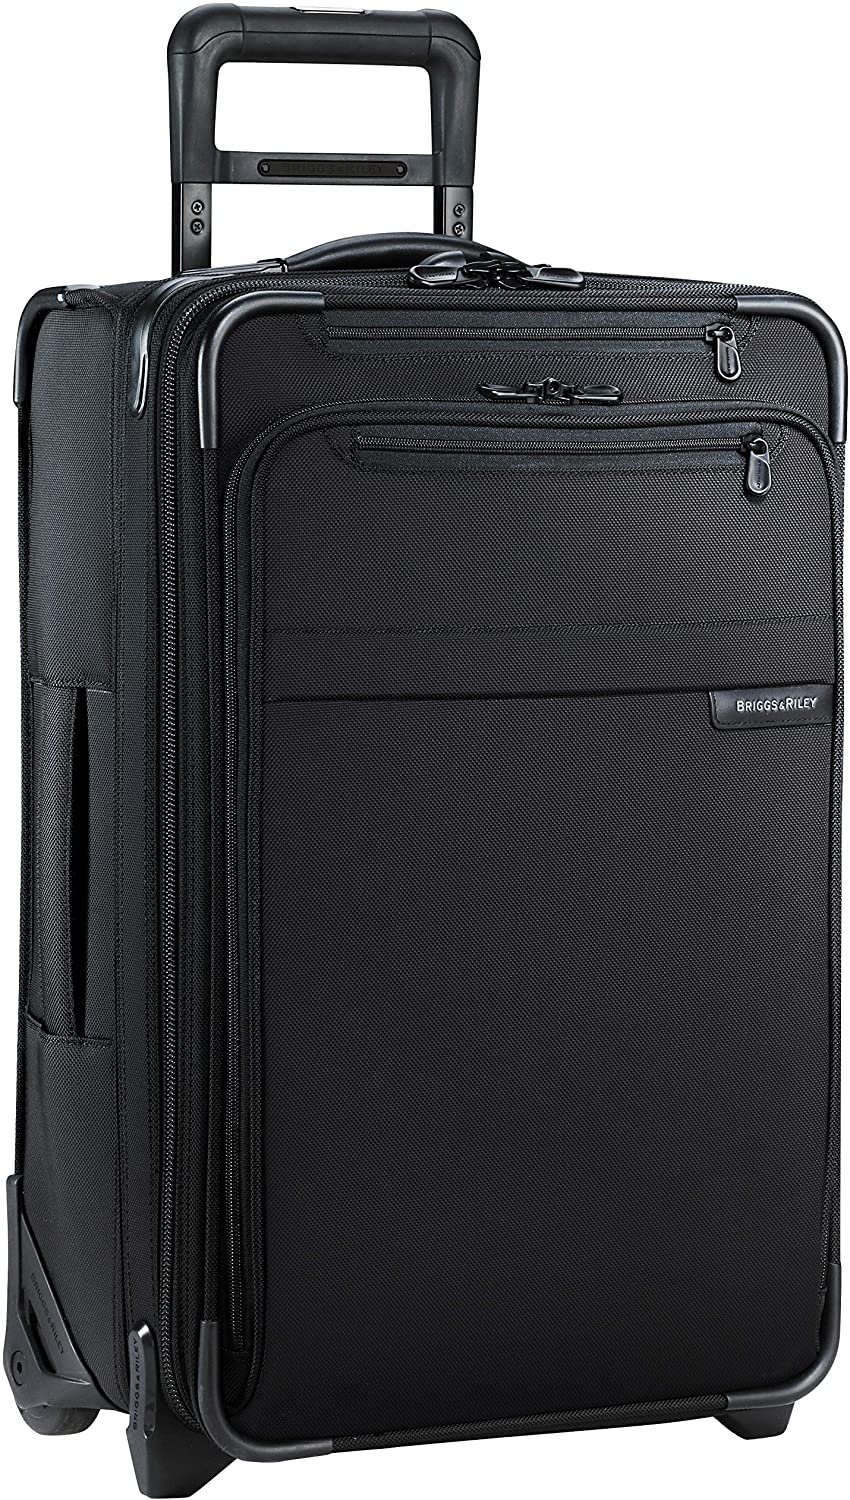 Briggs & Riley Baseline 22-inch Softside Carry-on Spinner